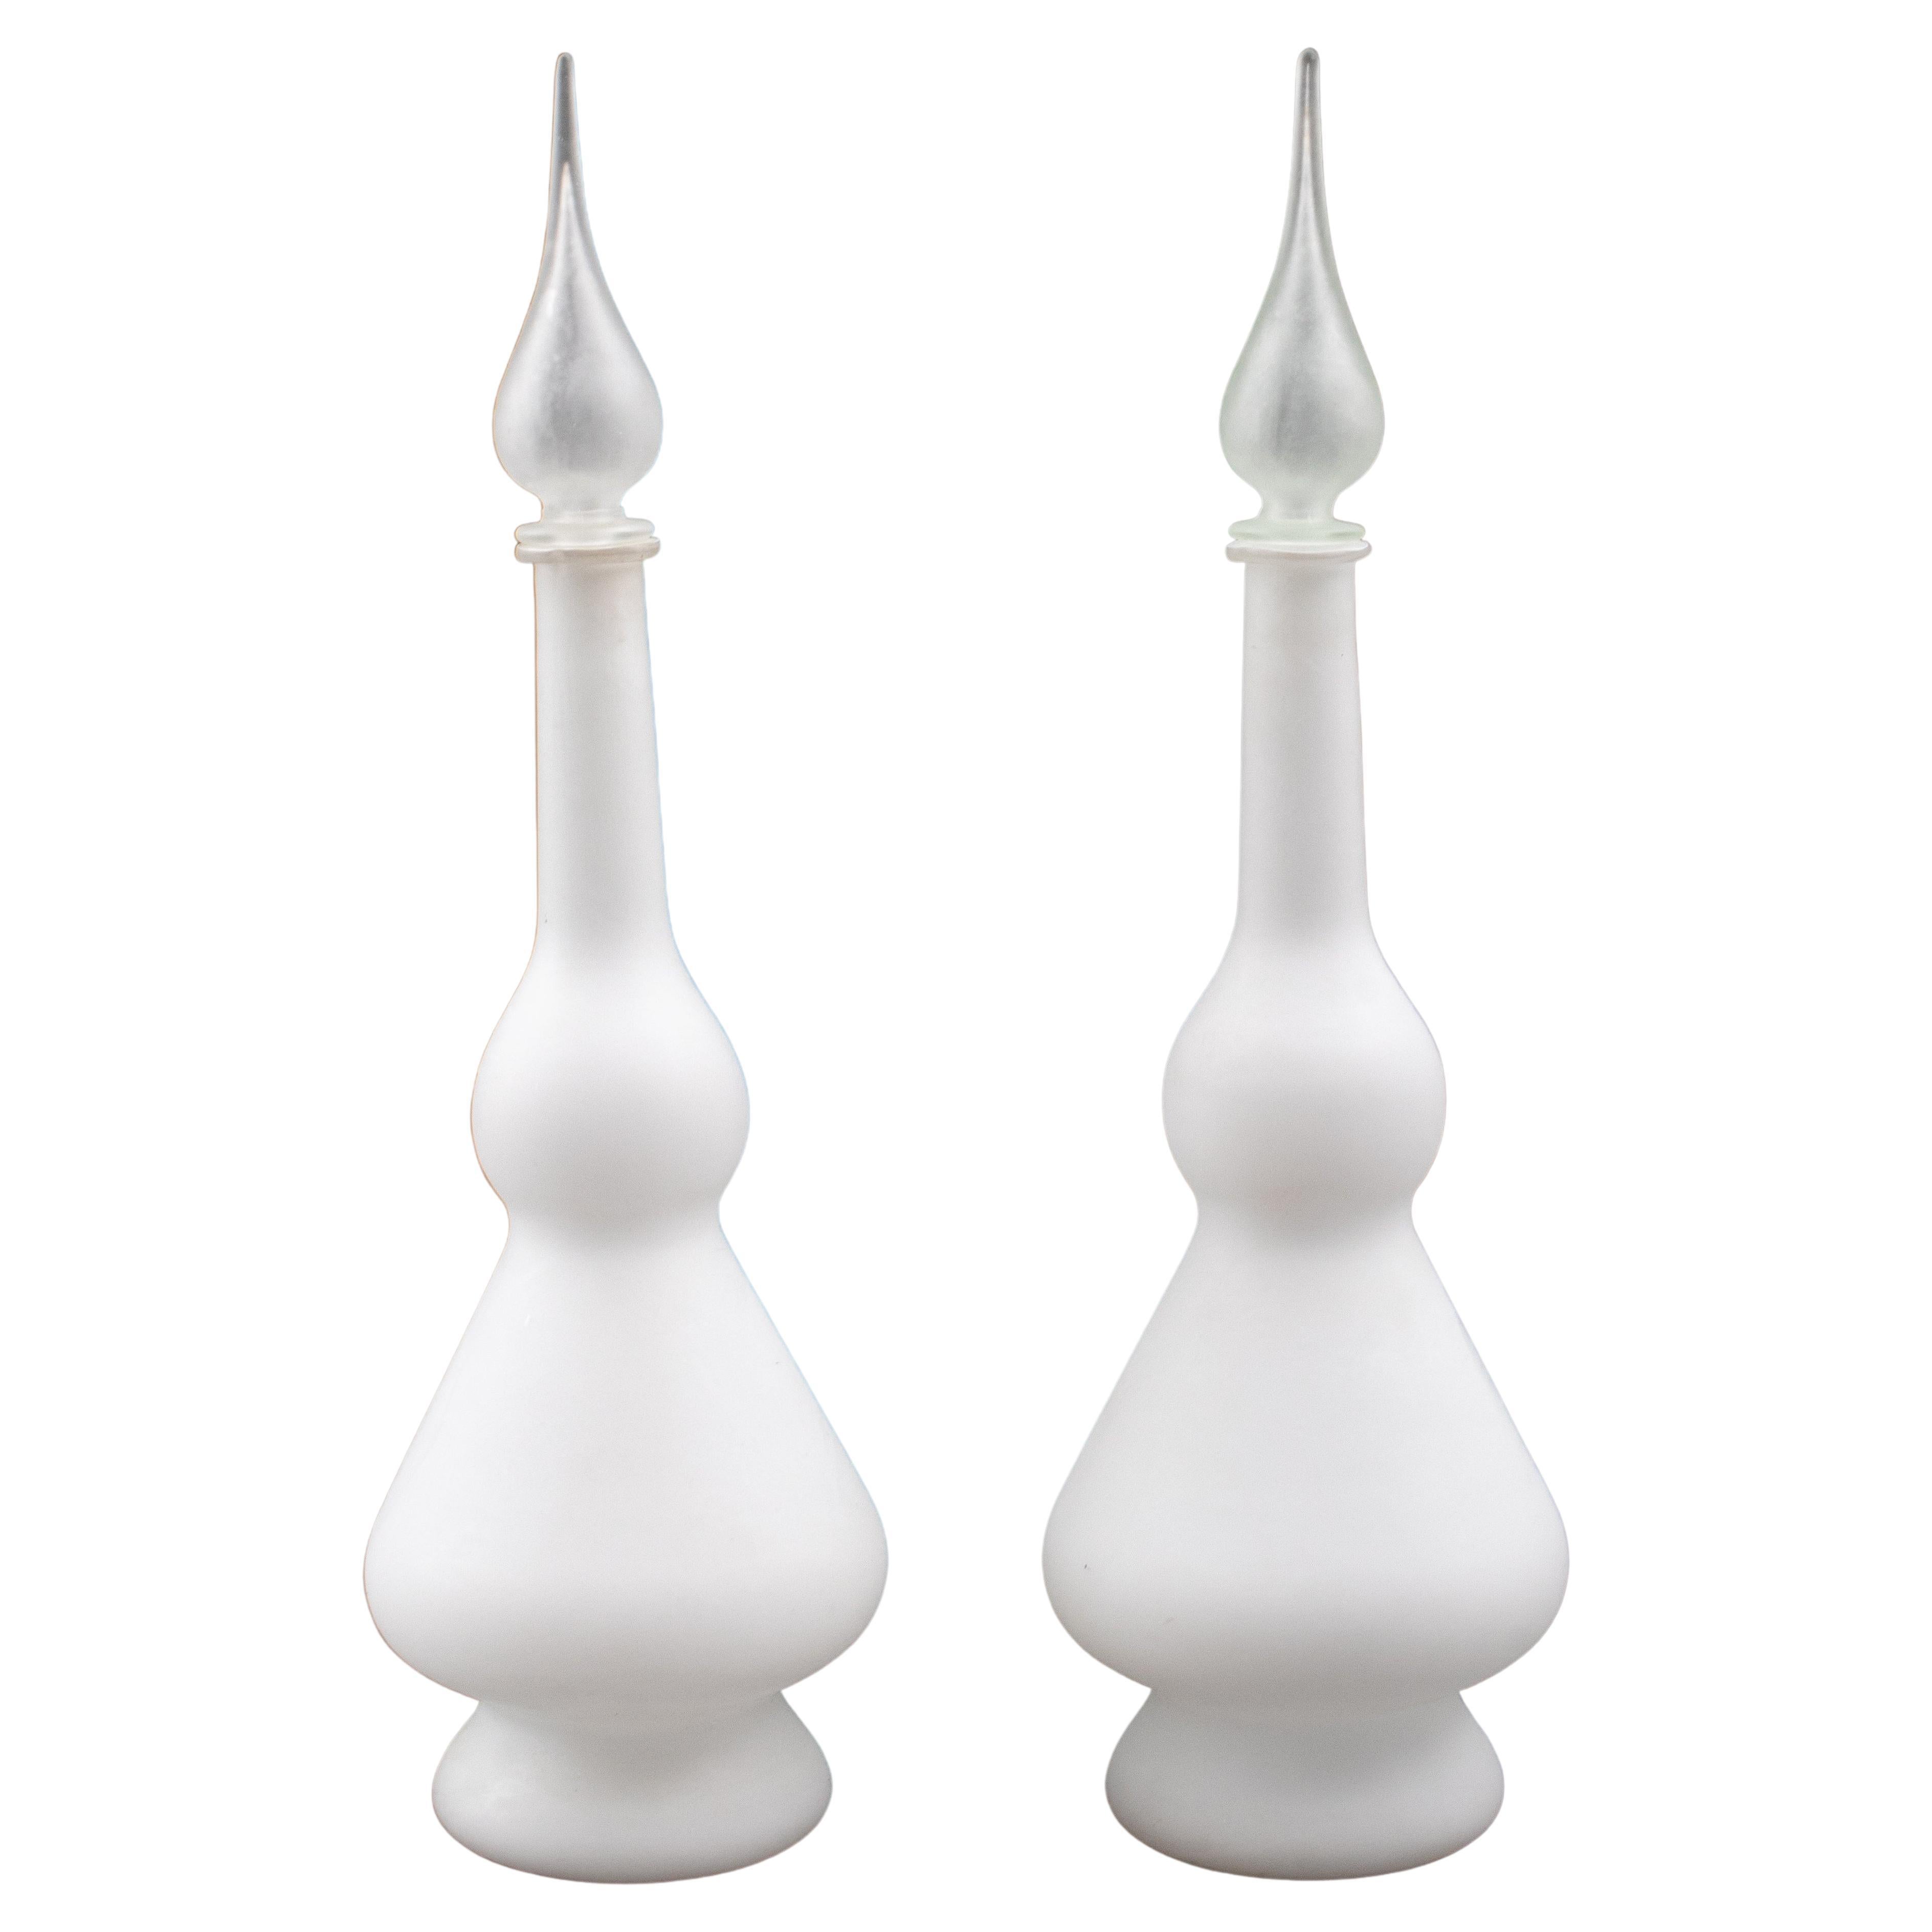 Pair of Italian Frosted White Glass Decanters